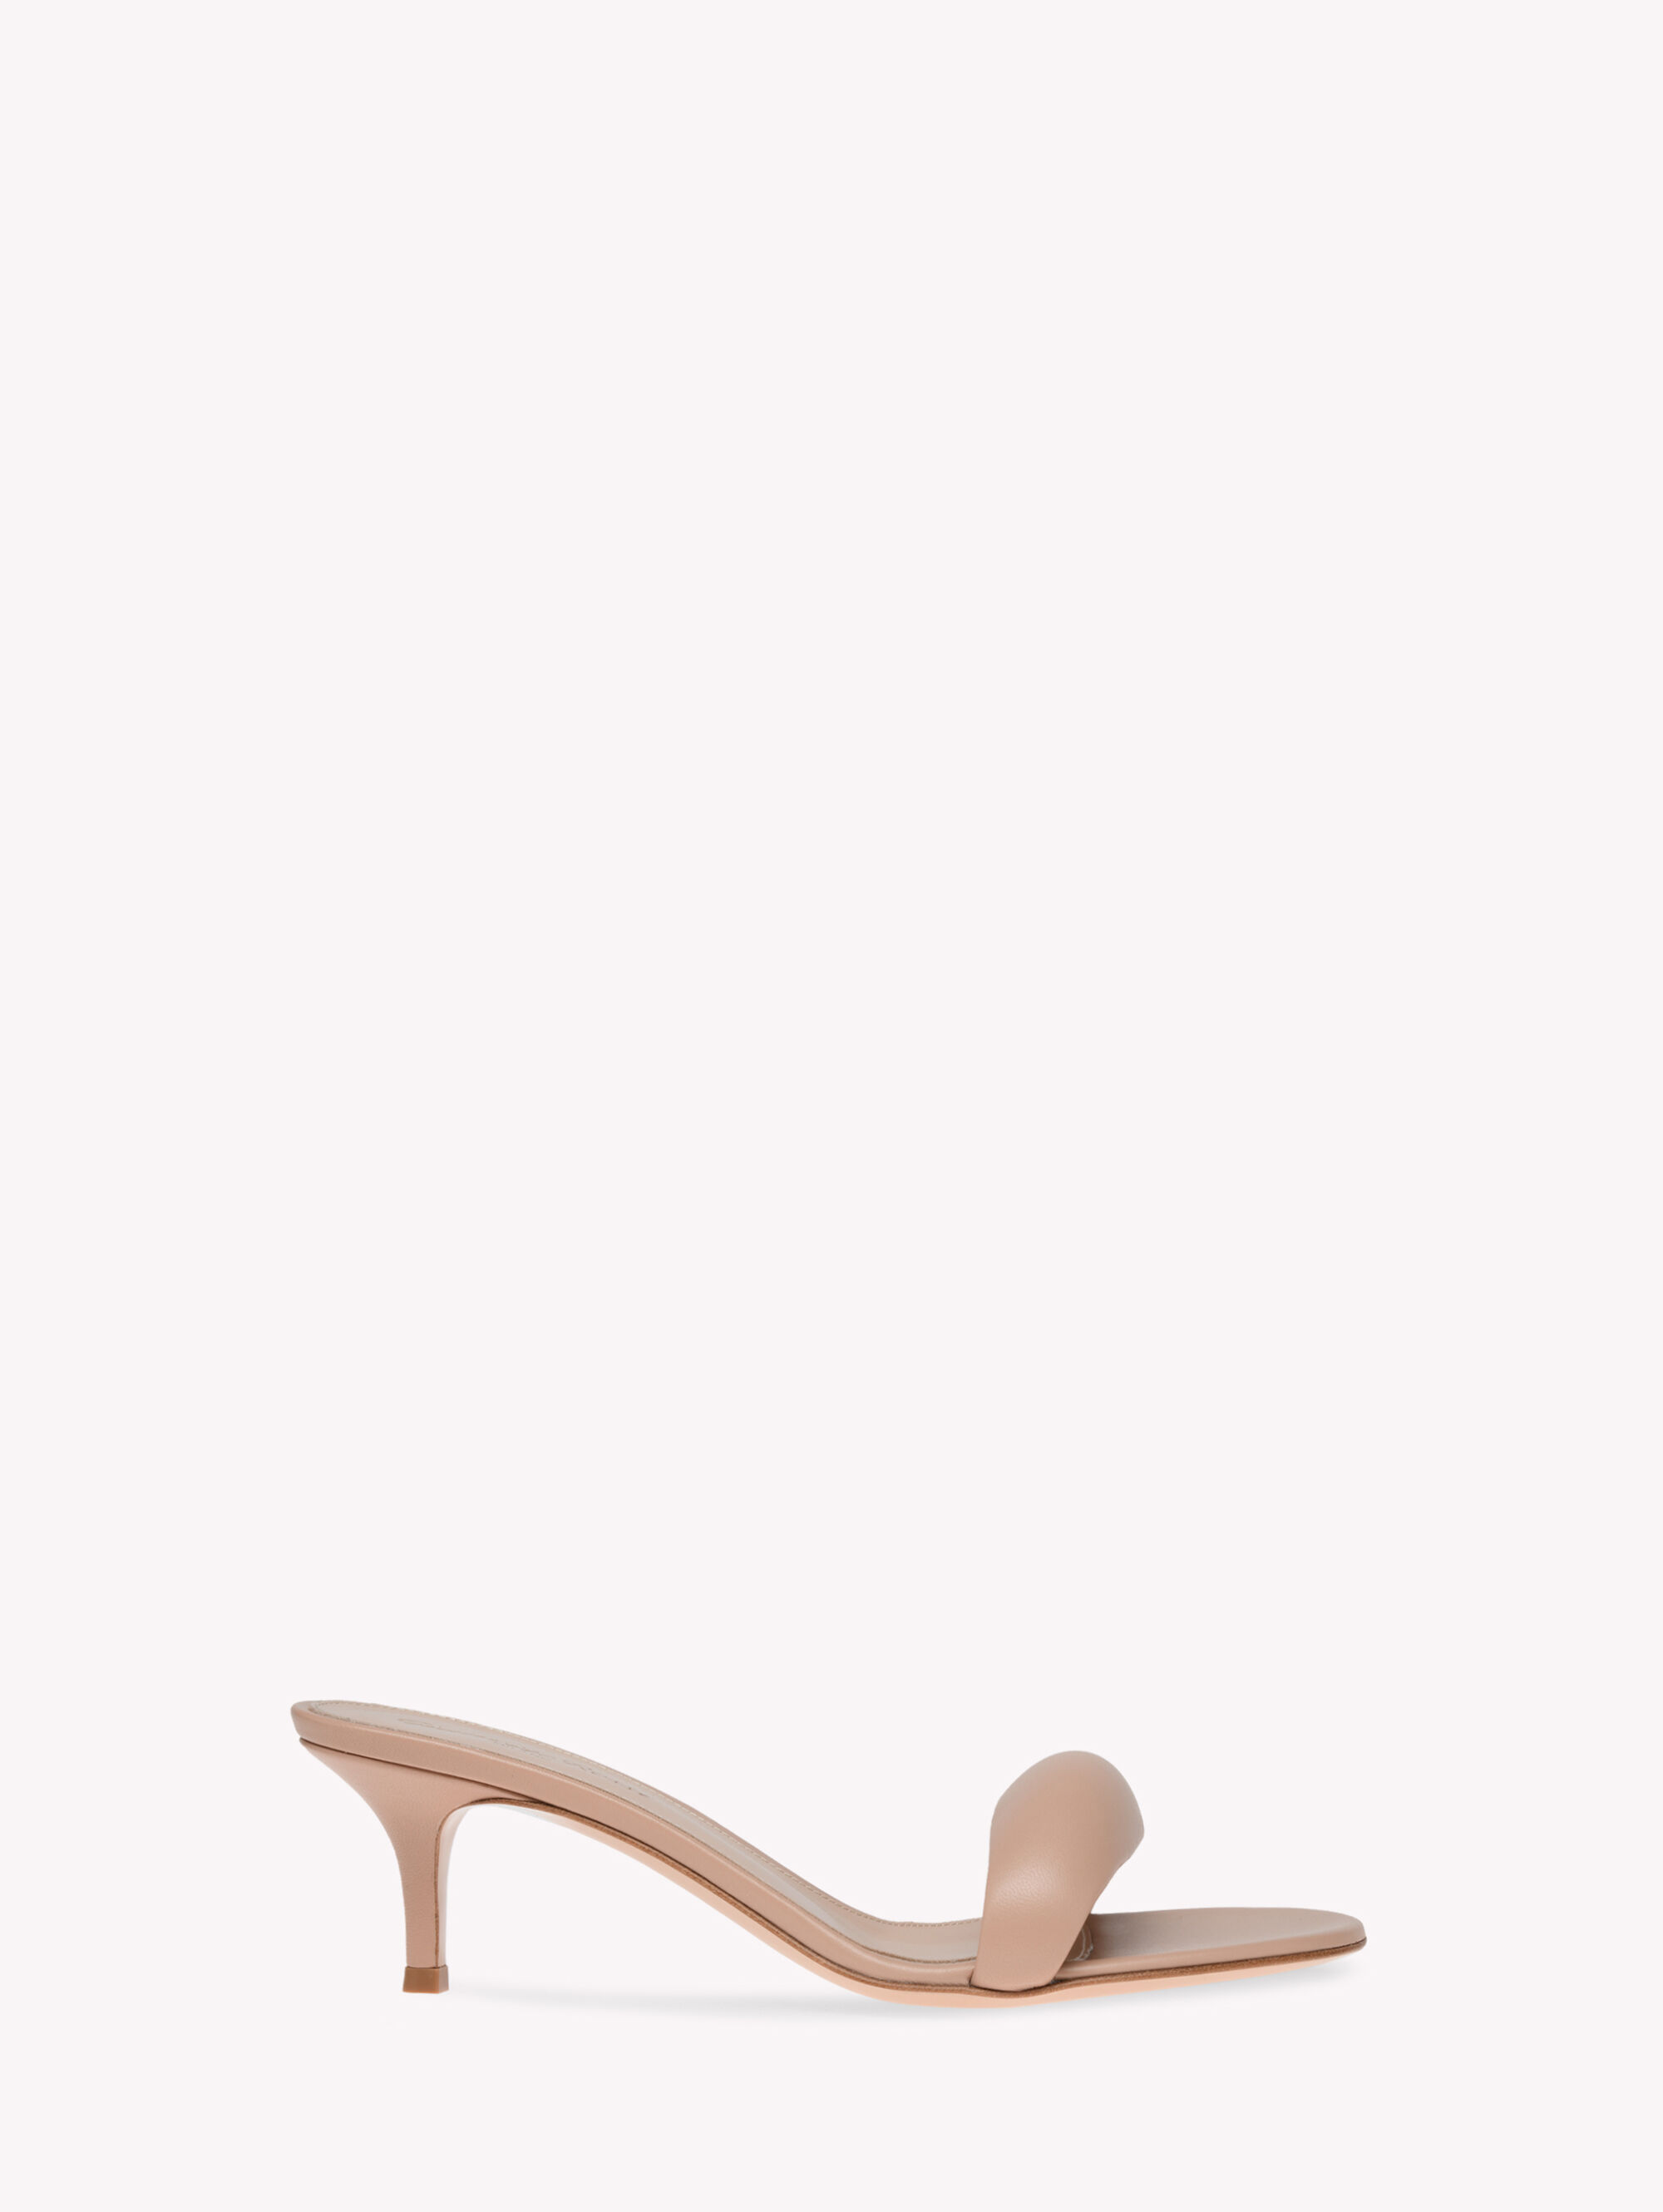 Find amazing products in ミュール today | Gianvito Rossi Japan